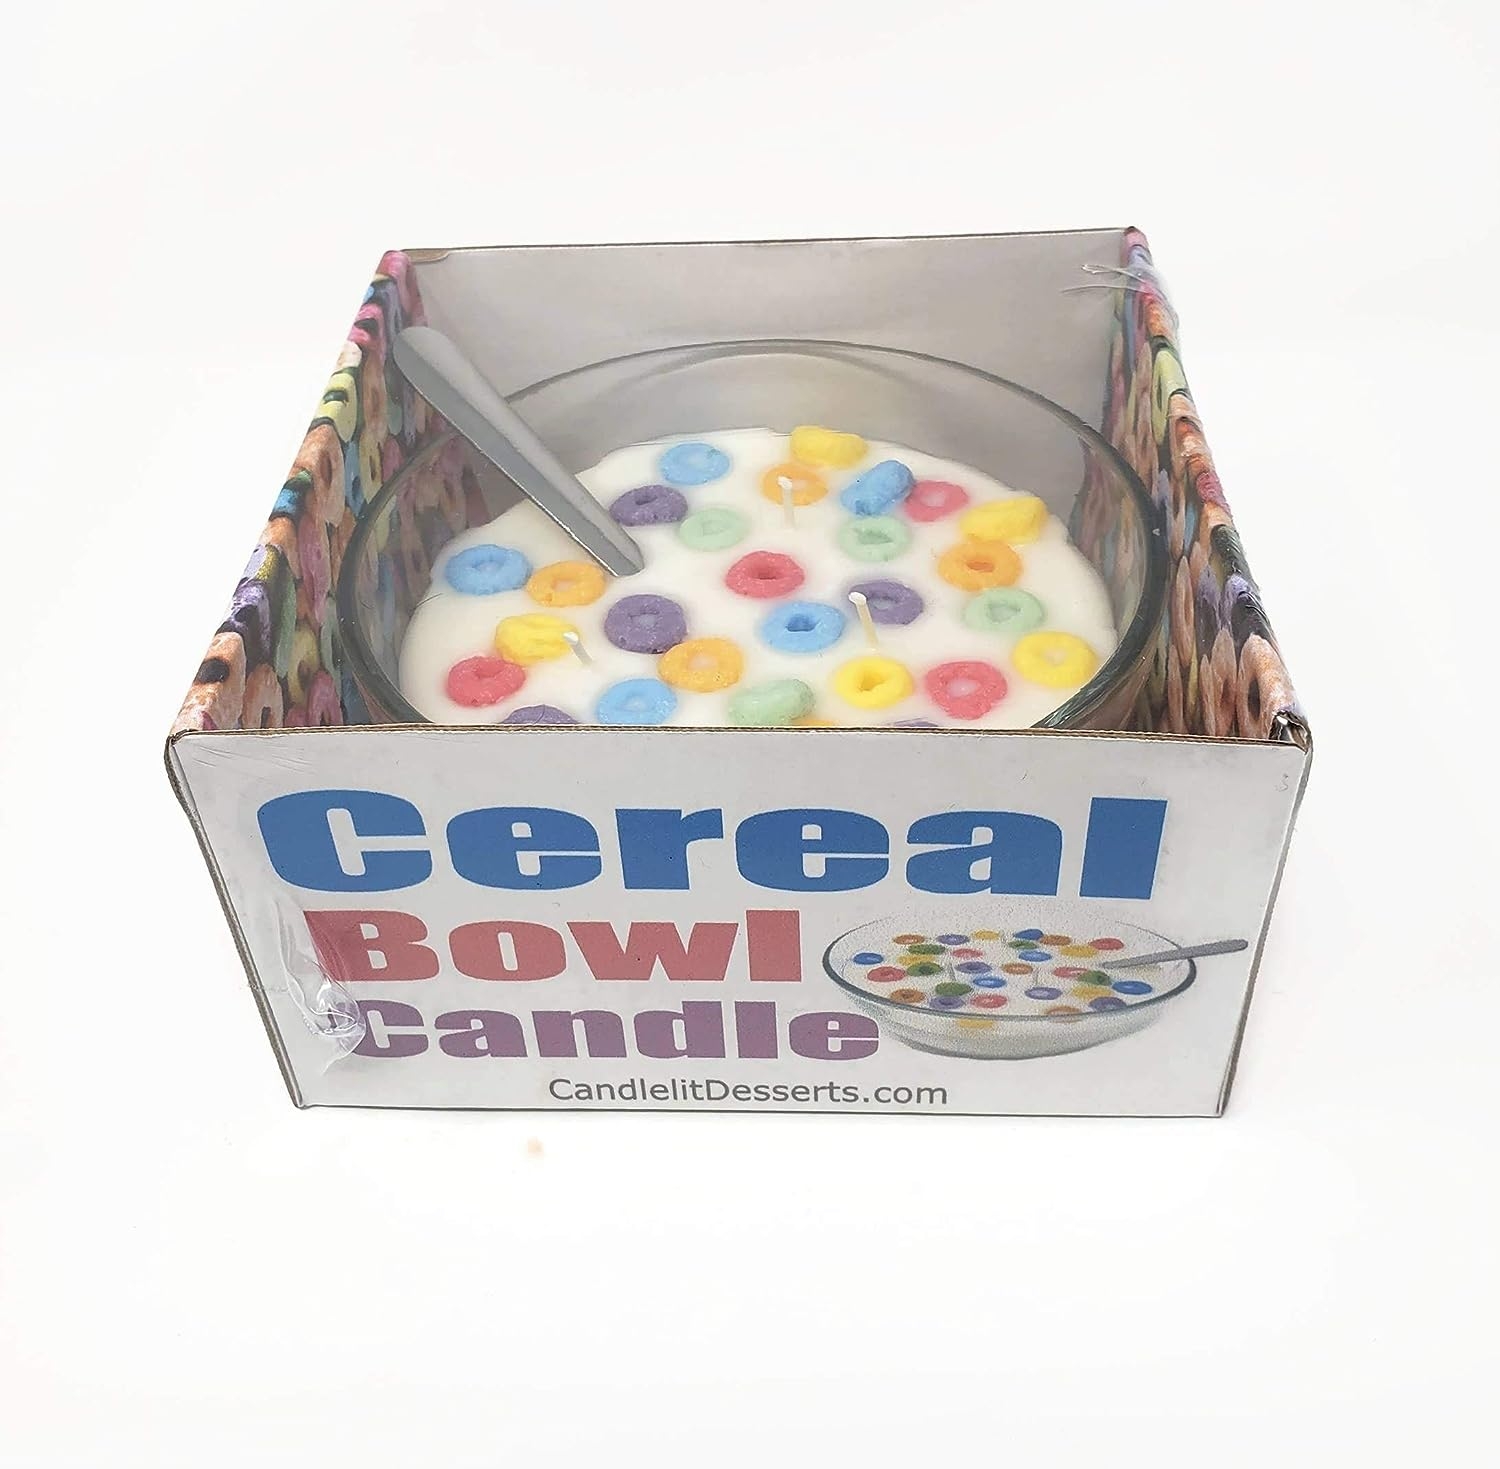 Candlelit Desserts Fruit Loops Style Scented Cereal Bowl Candle   price checker   price checker Description Gallery Reviews